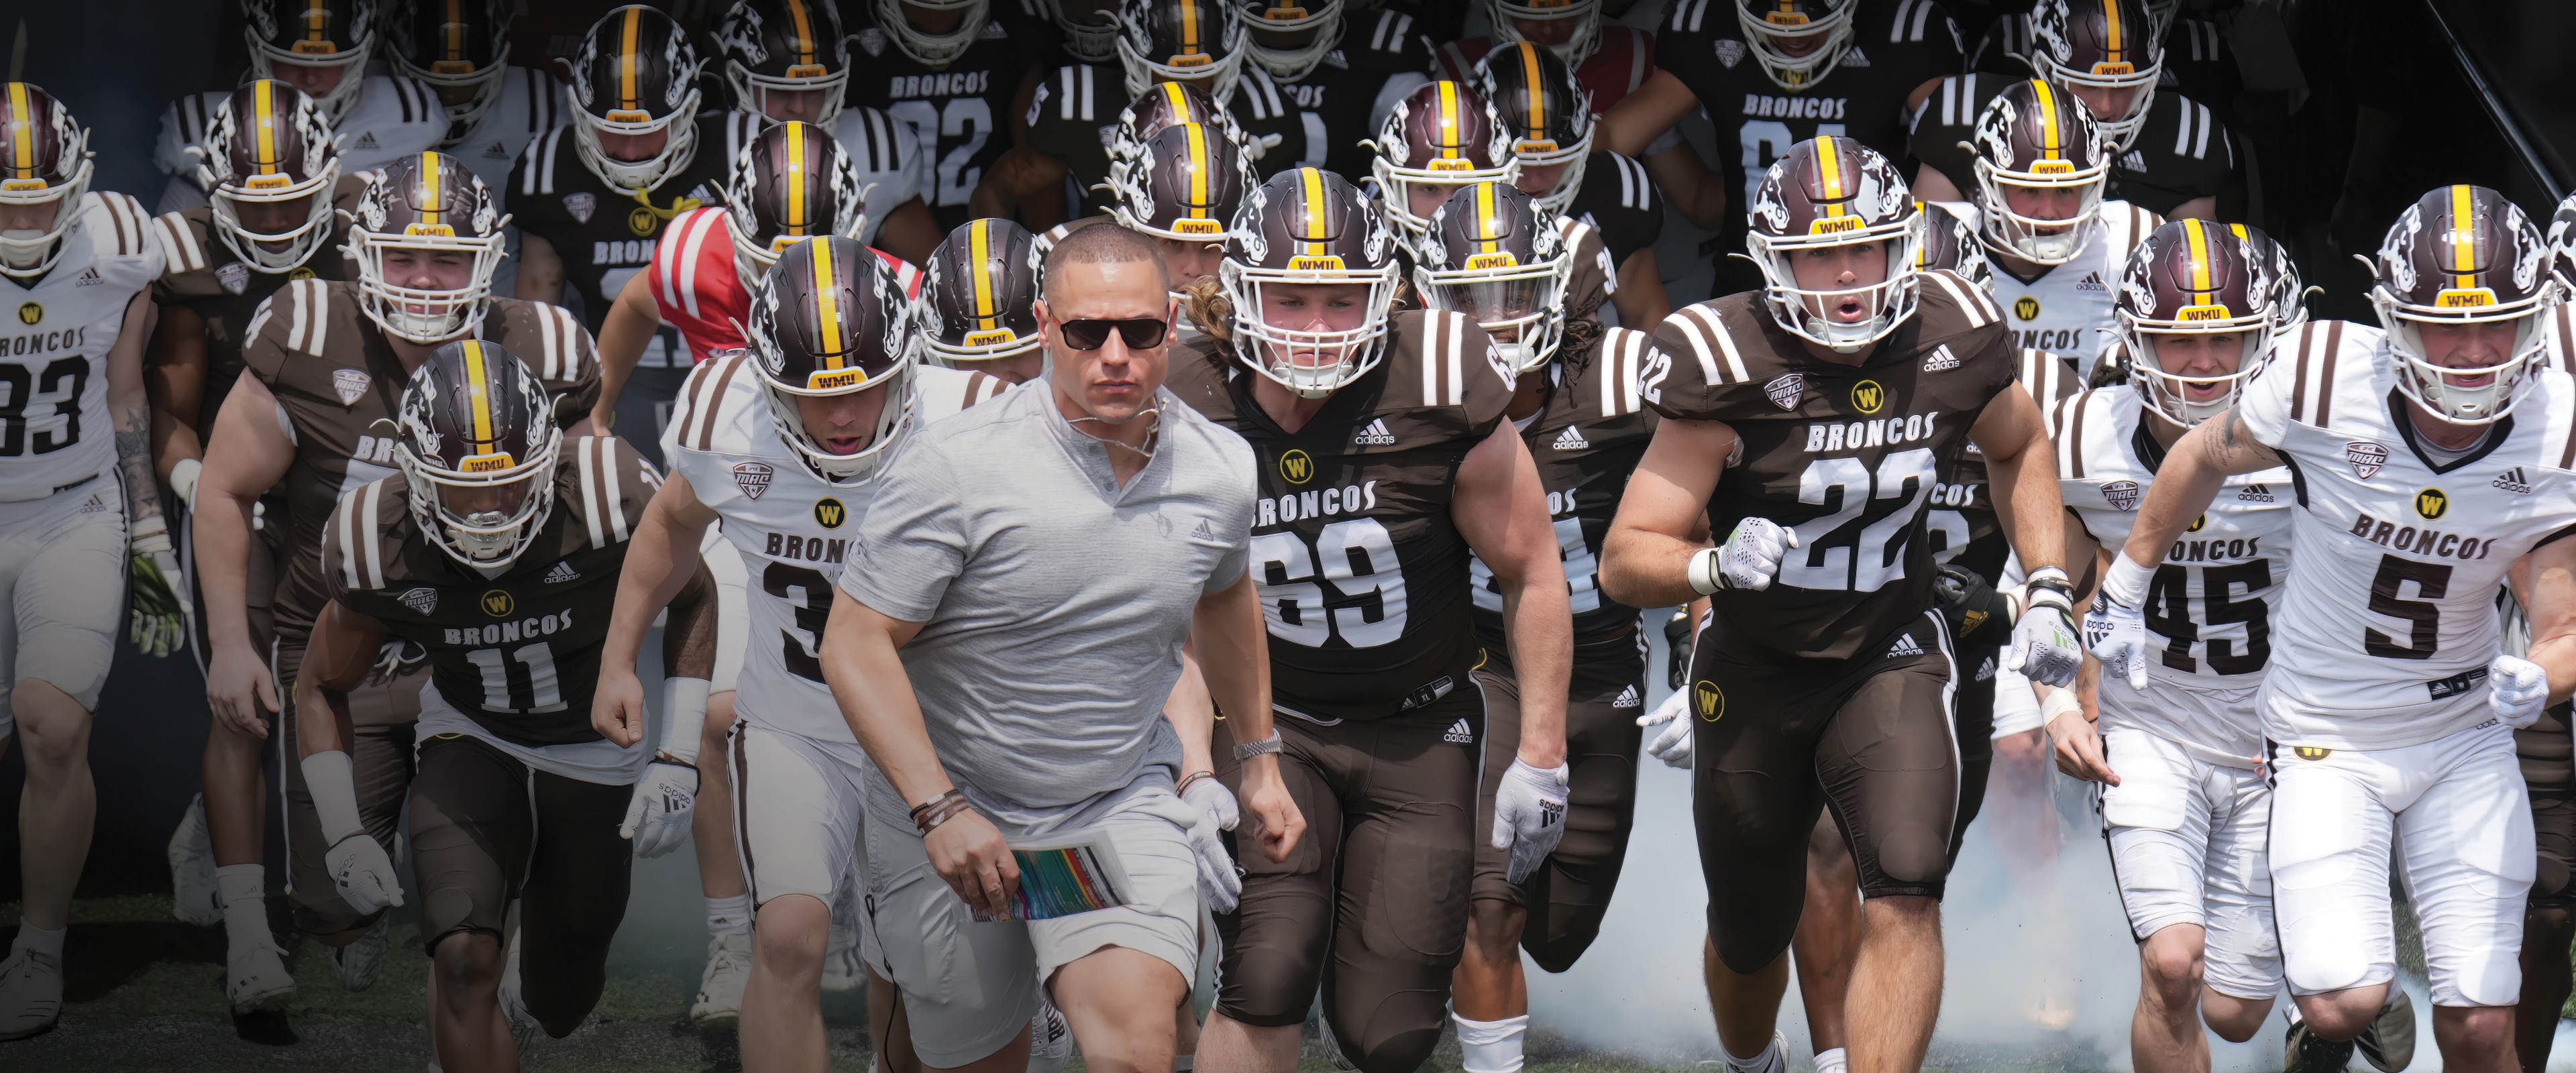 WMU's football team runs out onto the field behind new coach Lance Taylor.